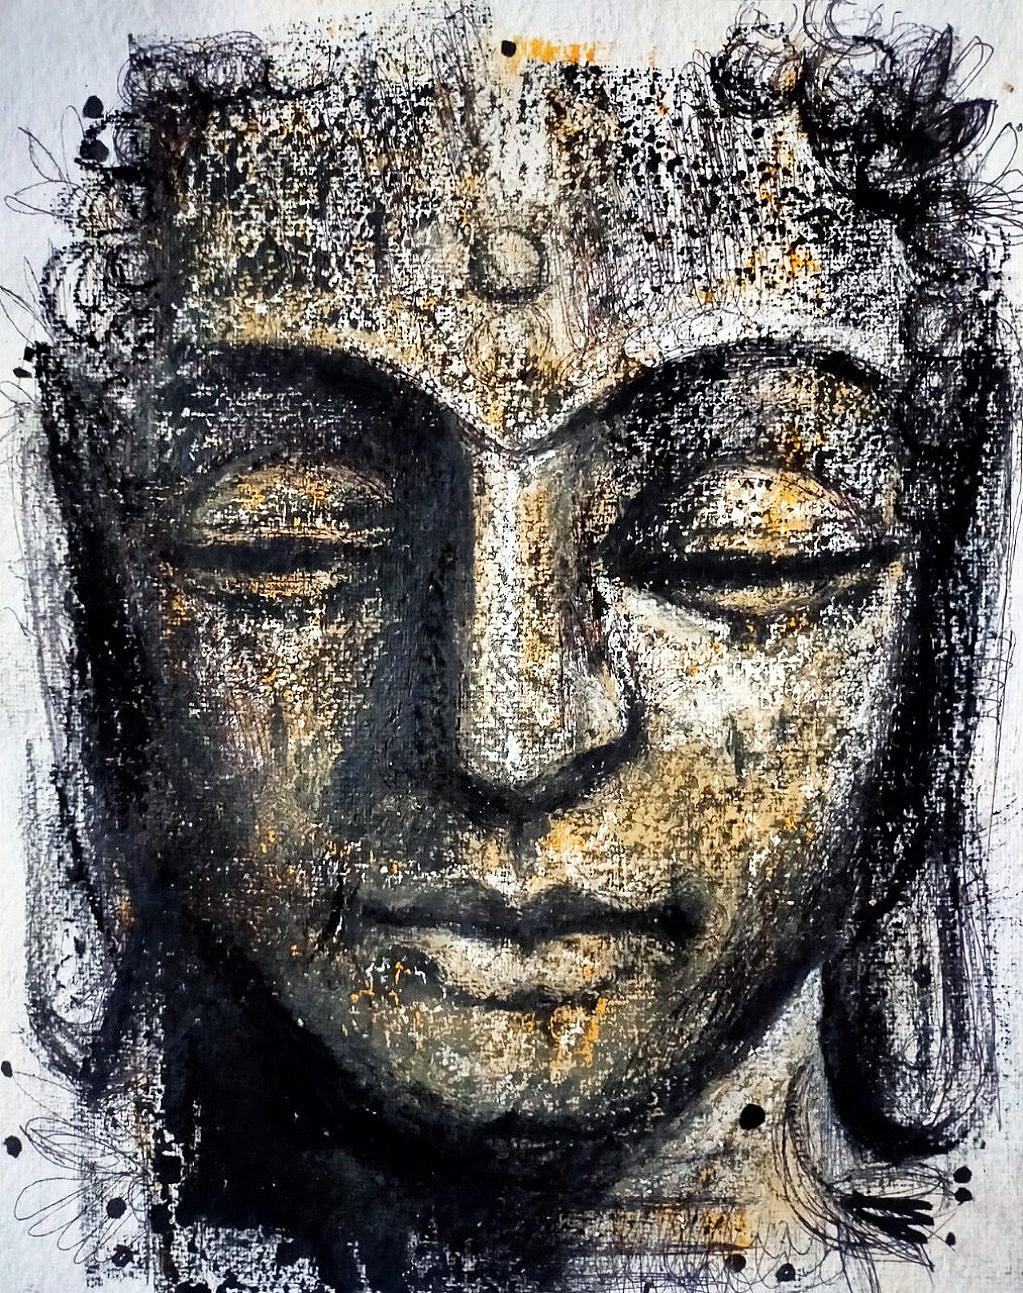 Lord Buddha, Mixed Media on Paper, Yellow Black by Contemporary Artist-In Stock